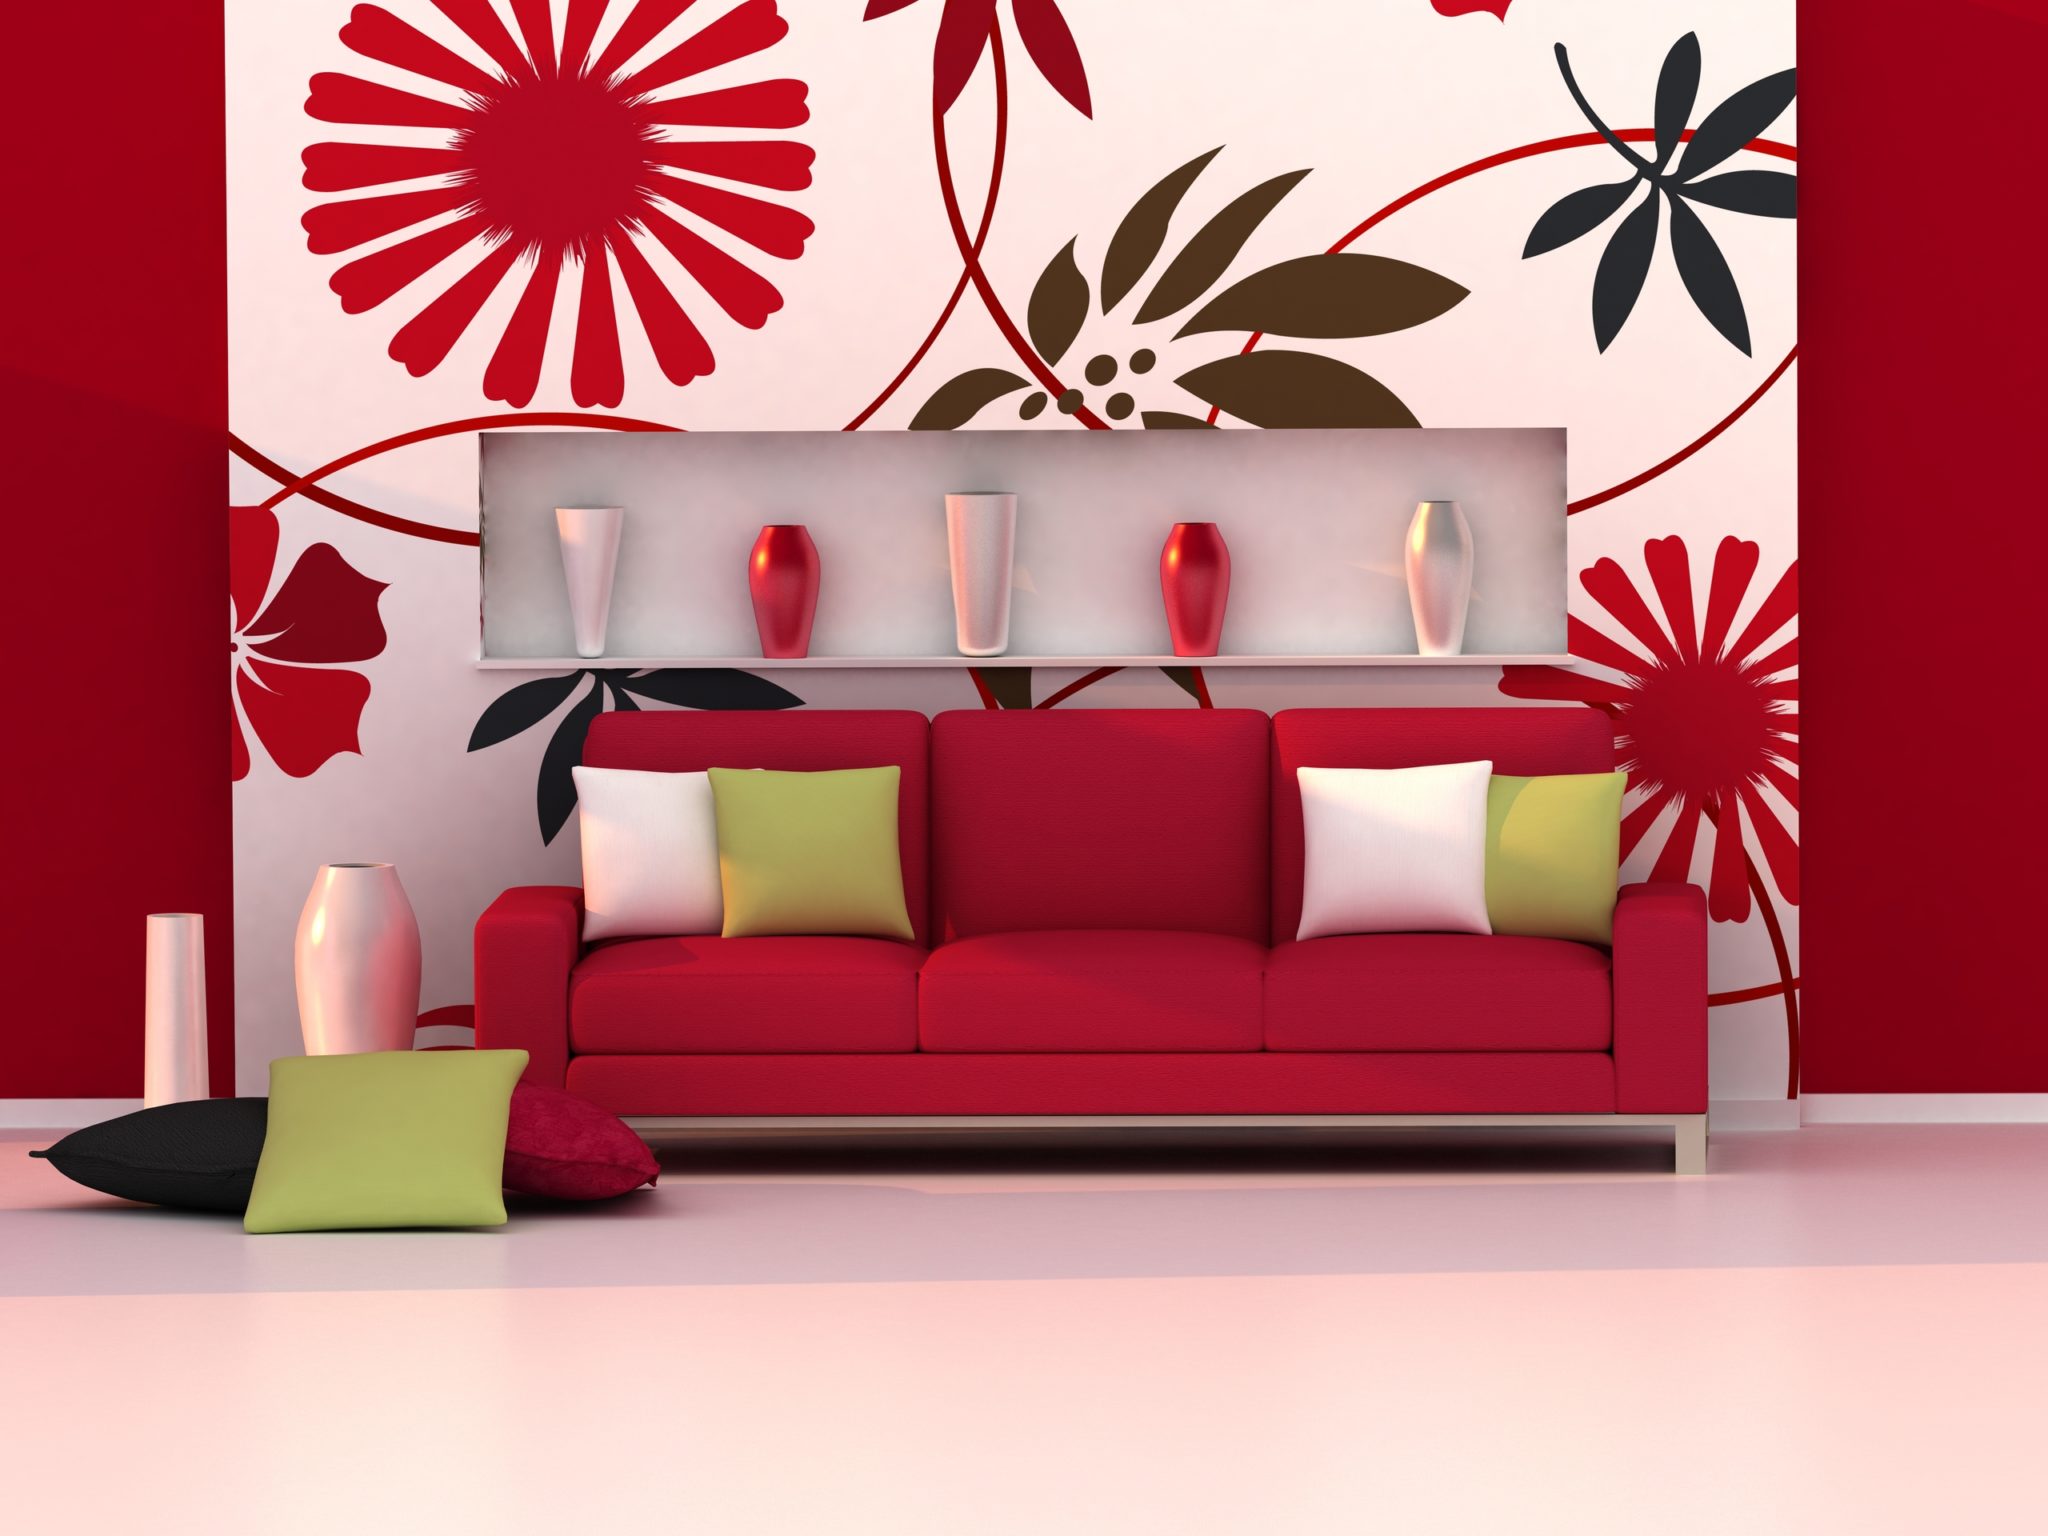 25 Beautiful Red Wallpapers You Should Check Out – Collection a day